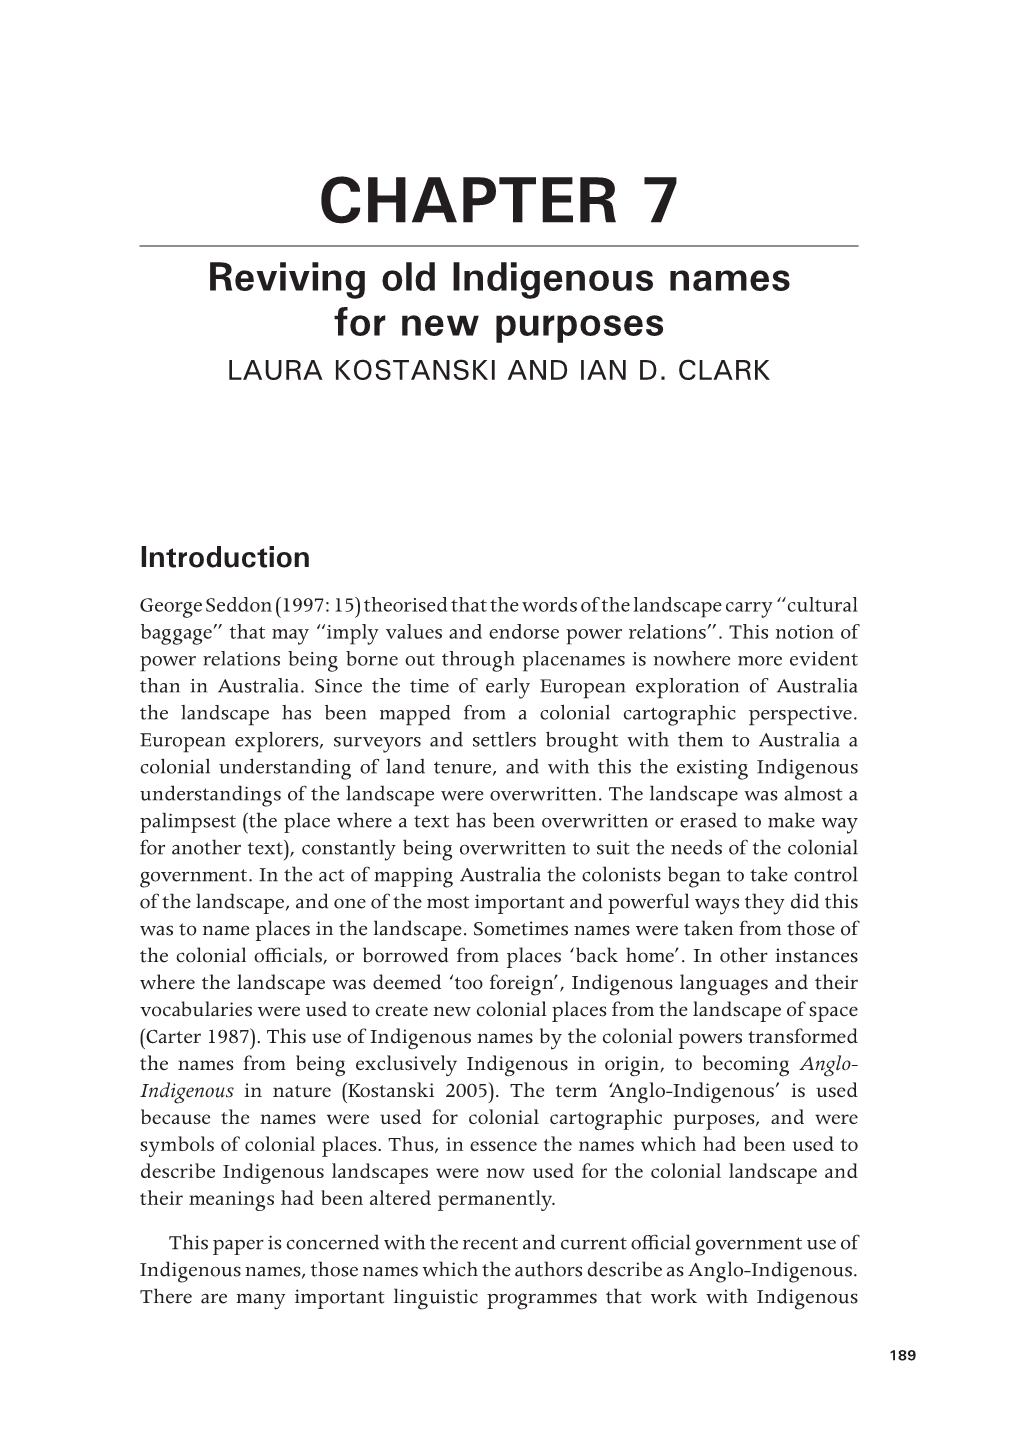 CHAPTER 7 Reviving Old Indigenous Names for New Purposes LAURA KOSTANSKI and IAN D